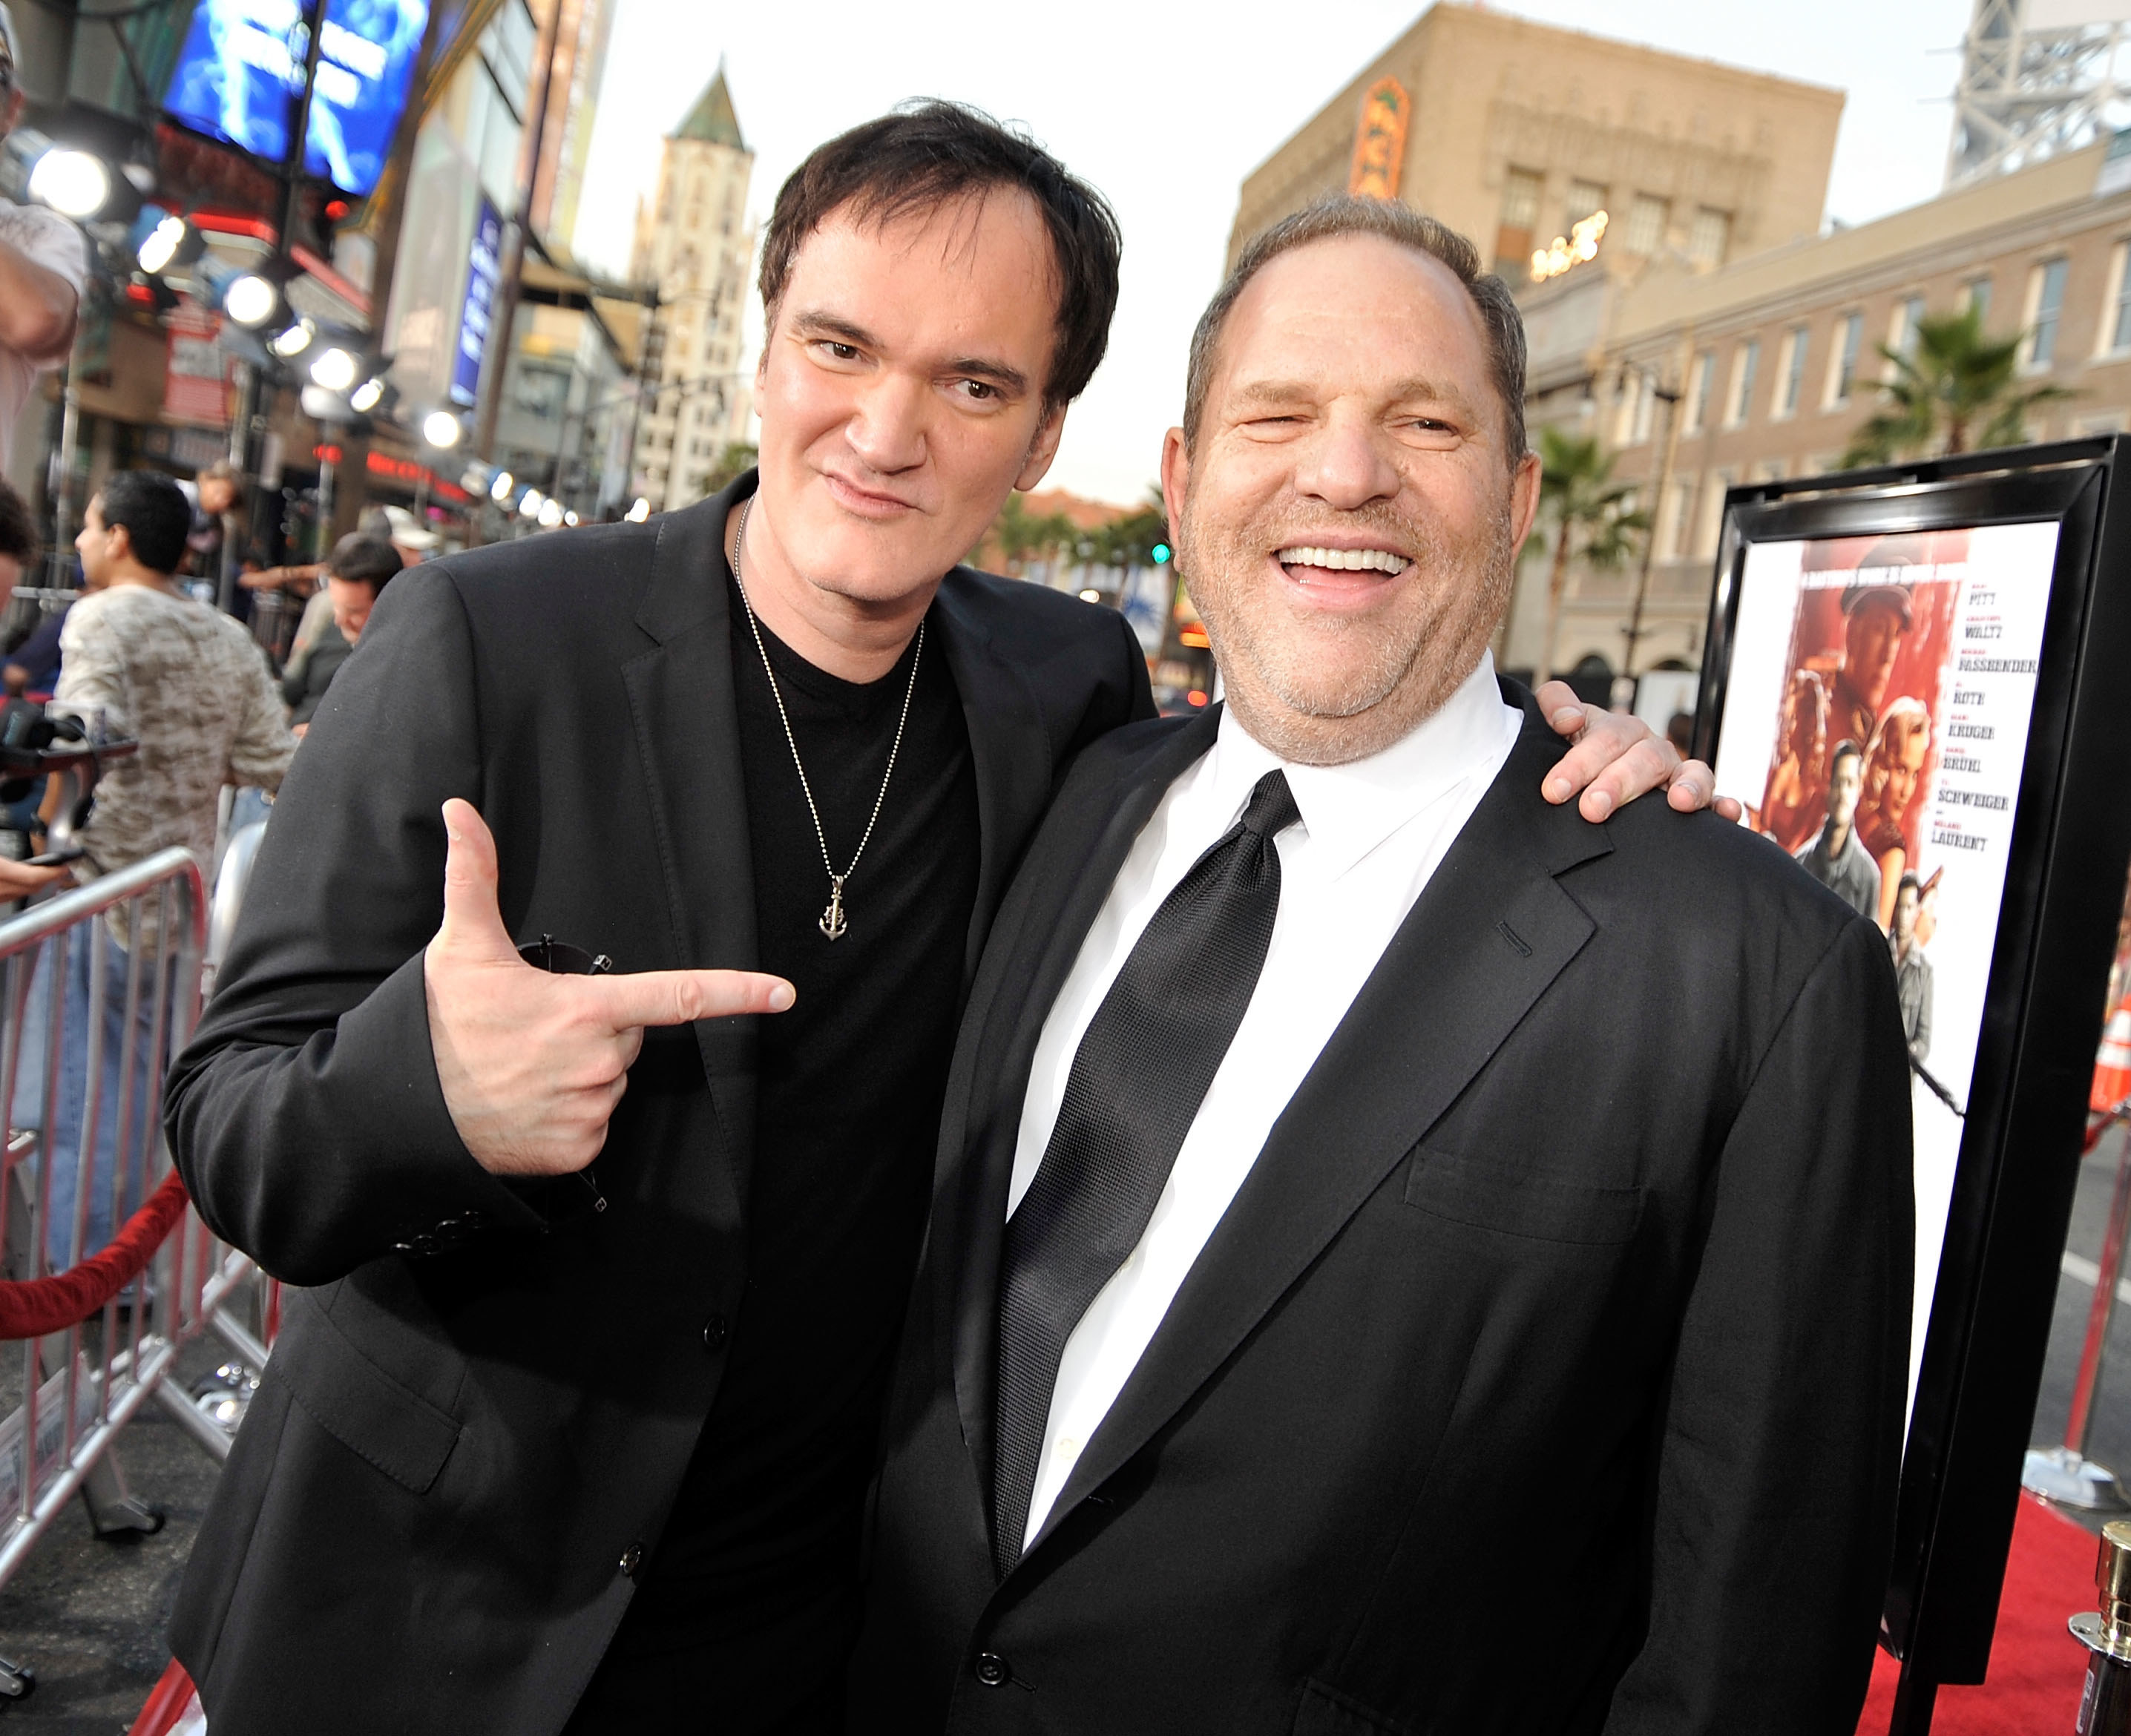 Tarantino points to Weinstein at a red carpet event in 2009